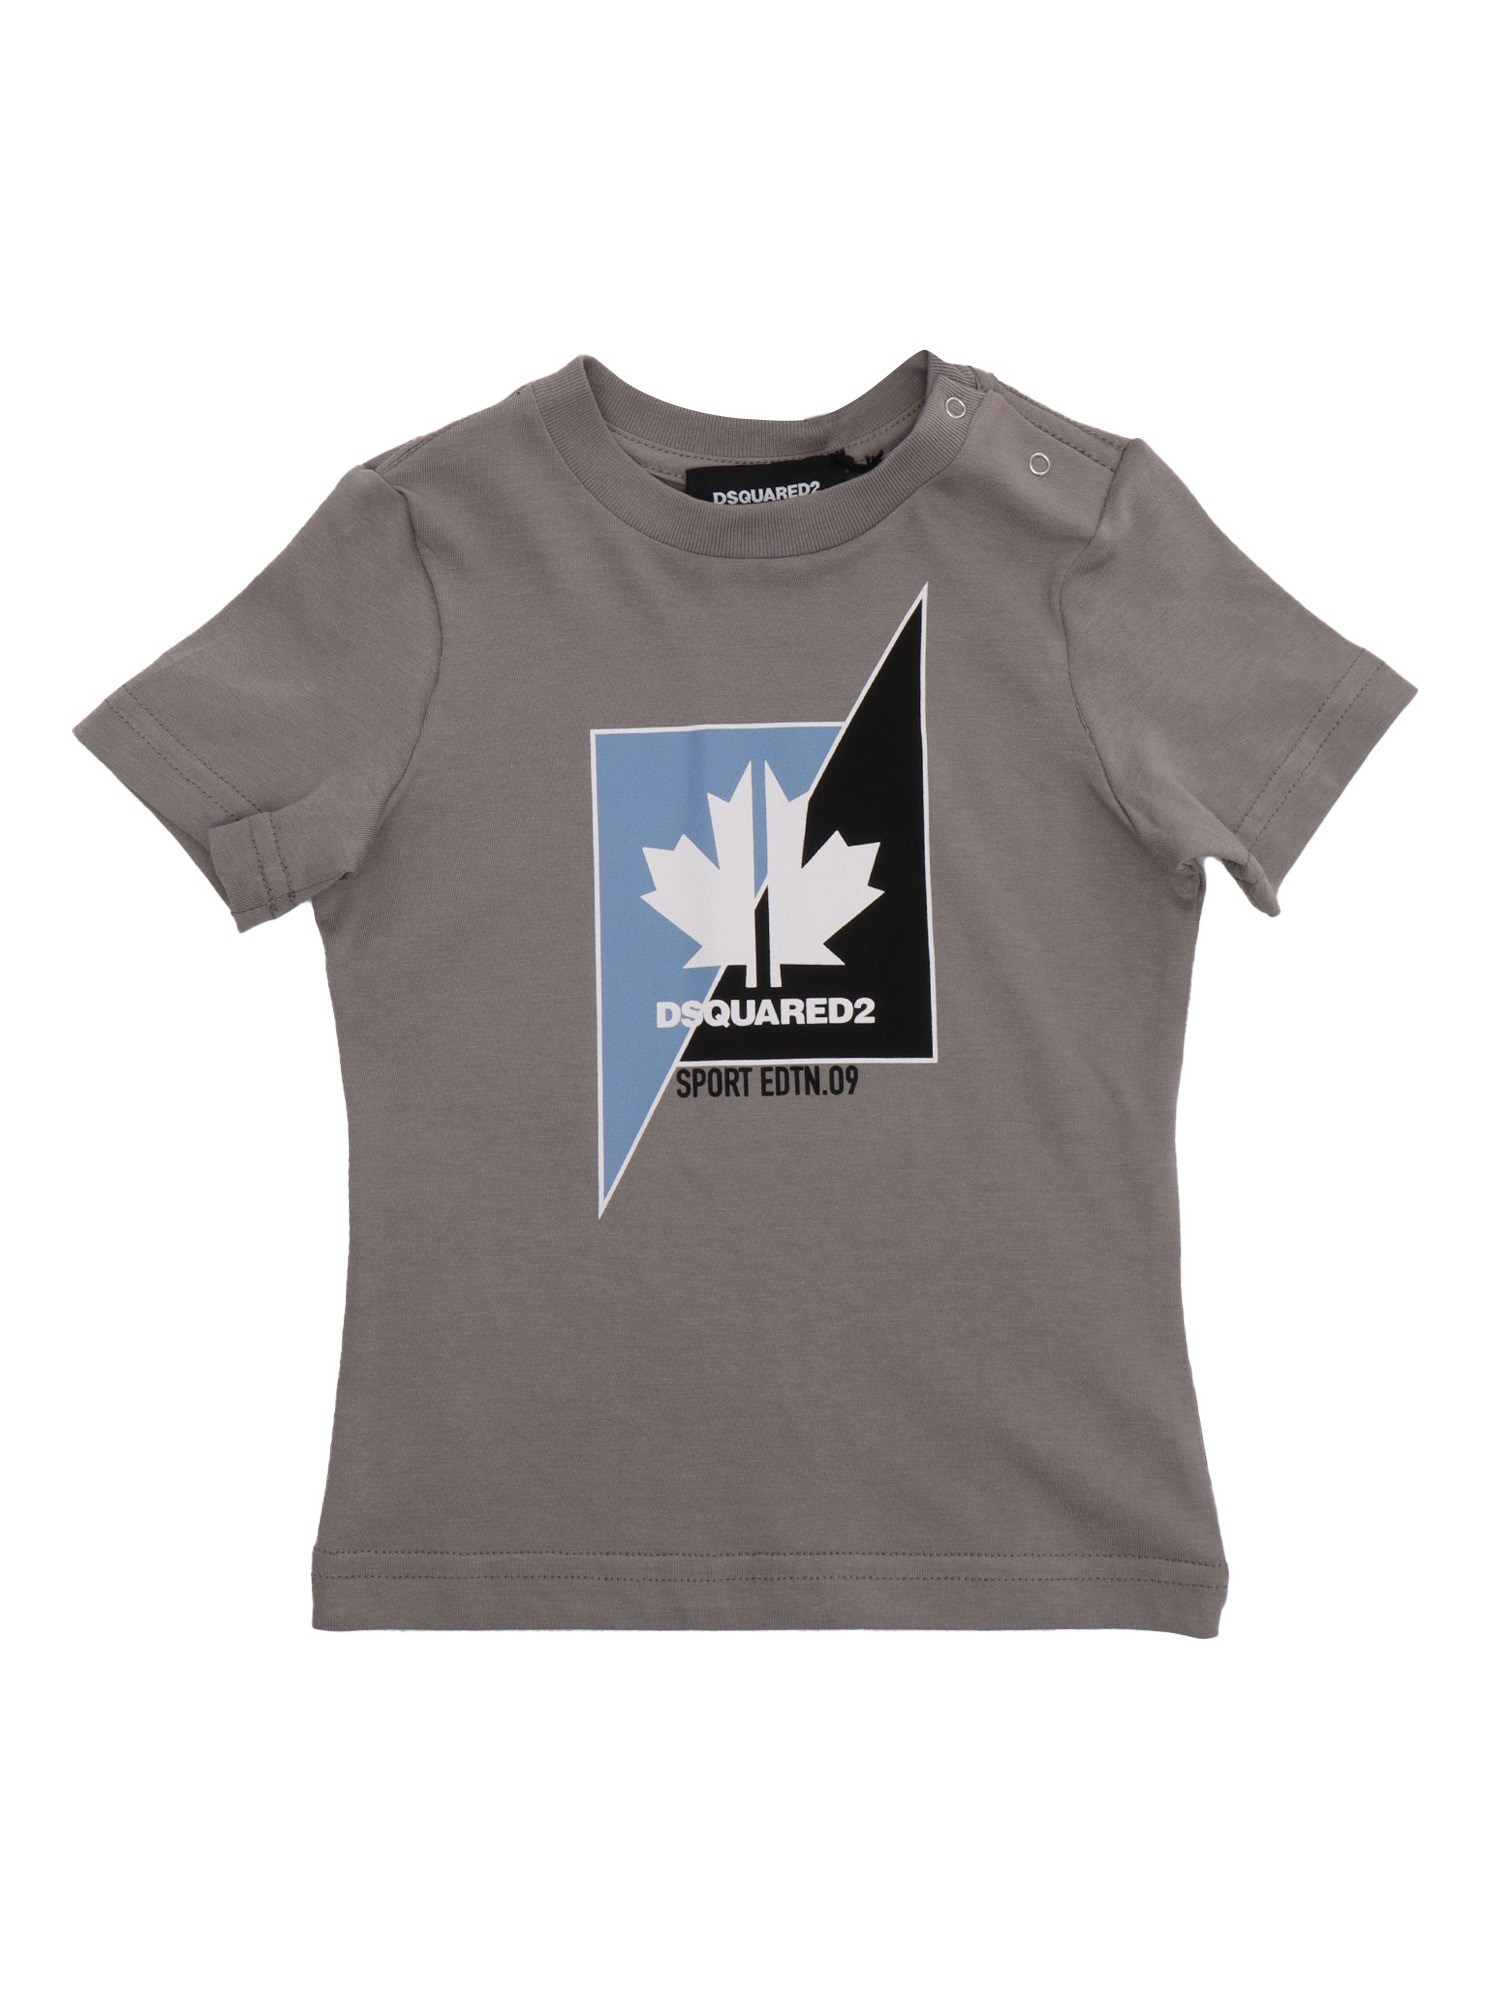 D-squared2 Kids' Gray T-shirt With Print